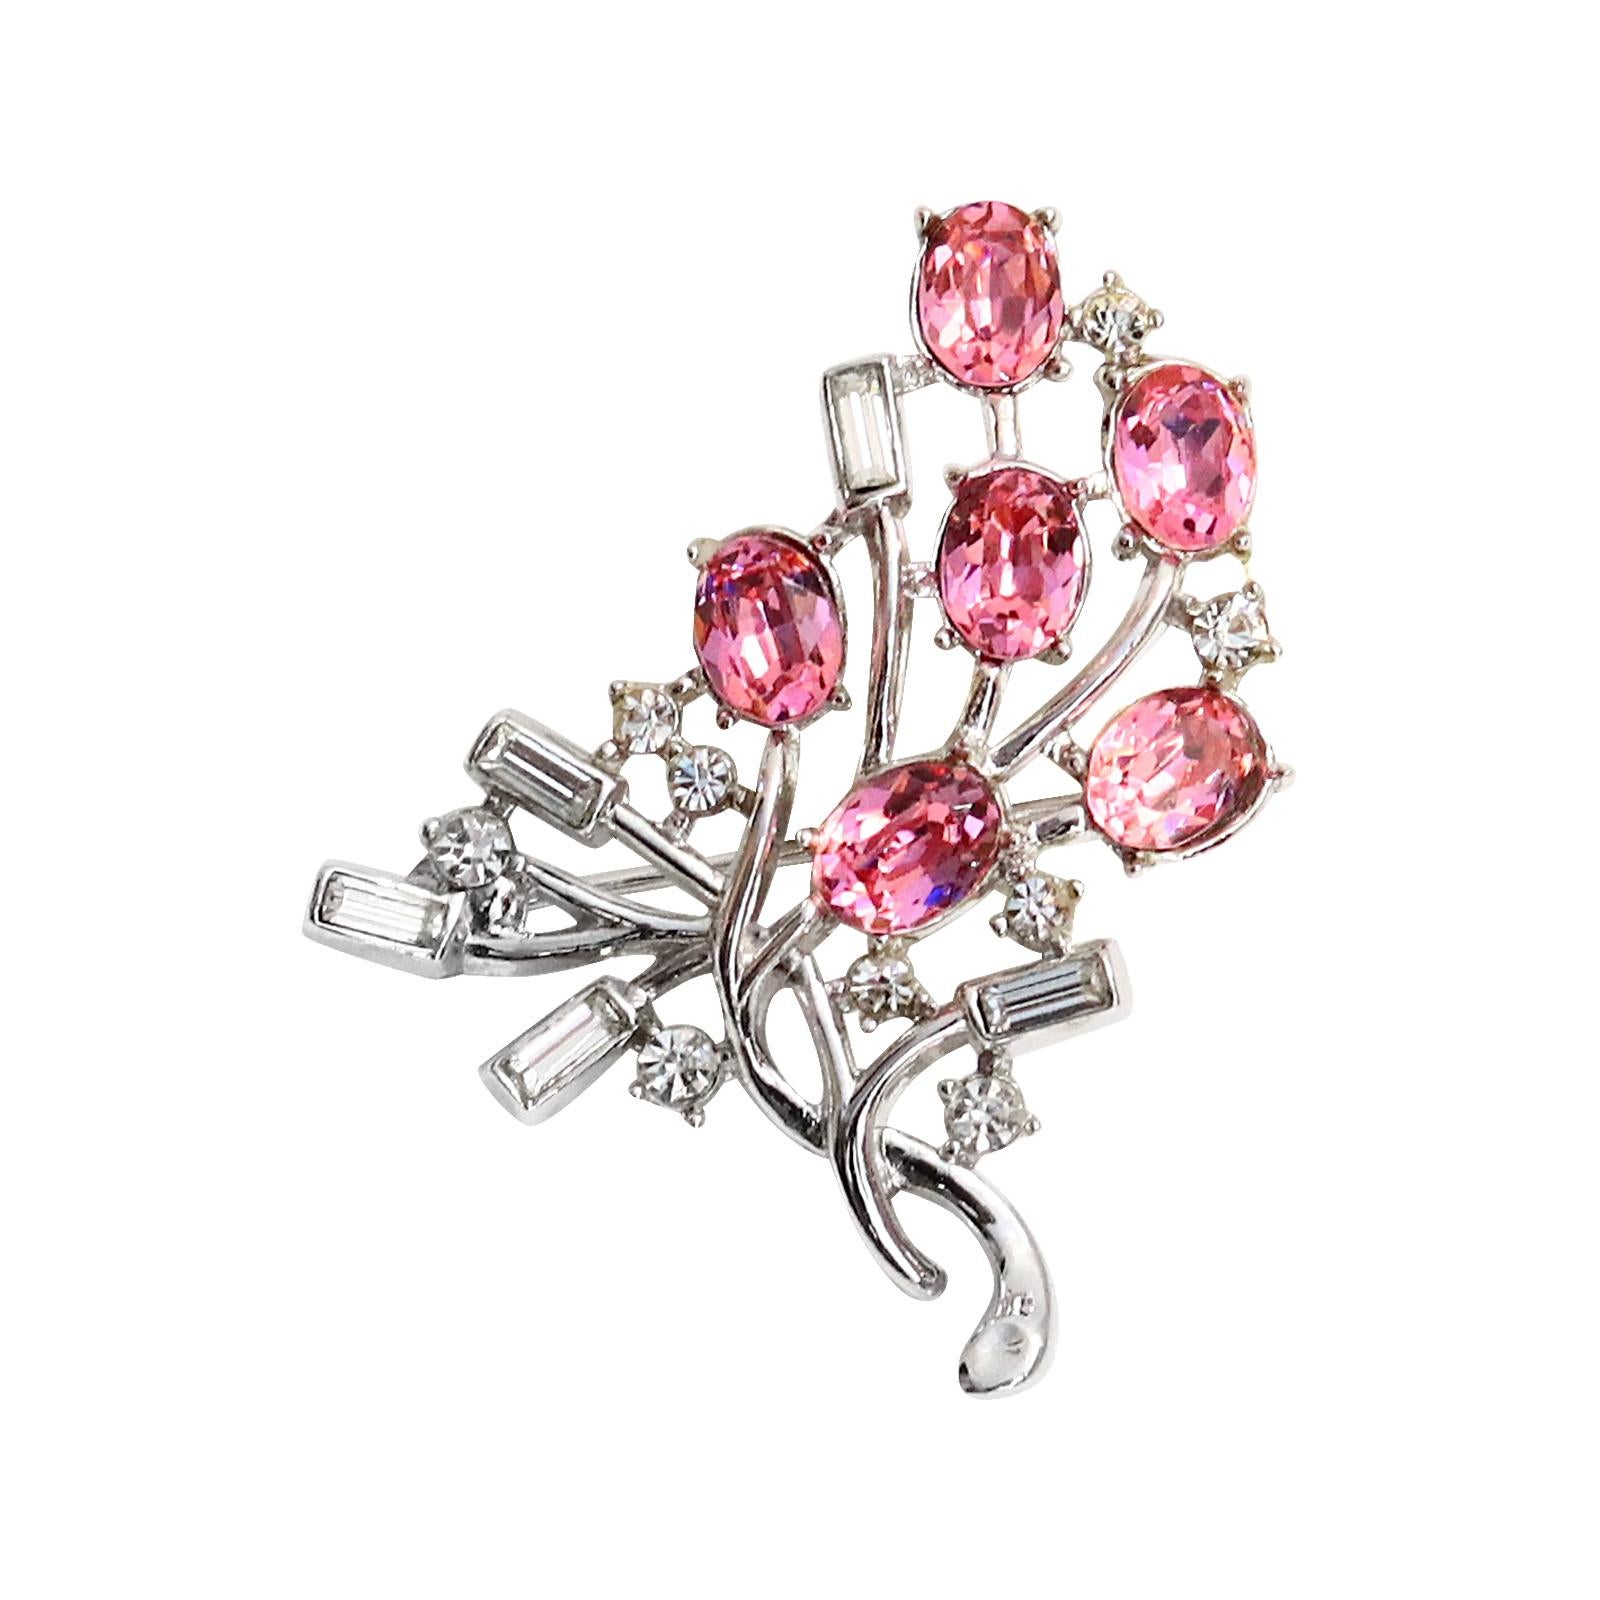 Vintage Trifari Diamante Pink and Baguette Brooch Circa 1960s.  Looks like Flowers wrapped around a vine. The flowers are represented by oval shaped pink stones that are interspersed by small round stones and then the leaves are represented by